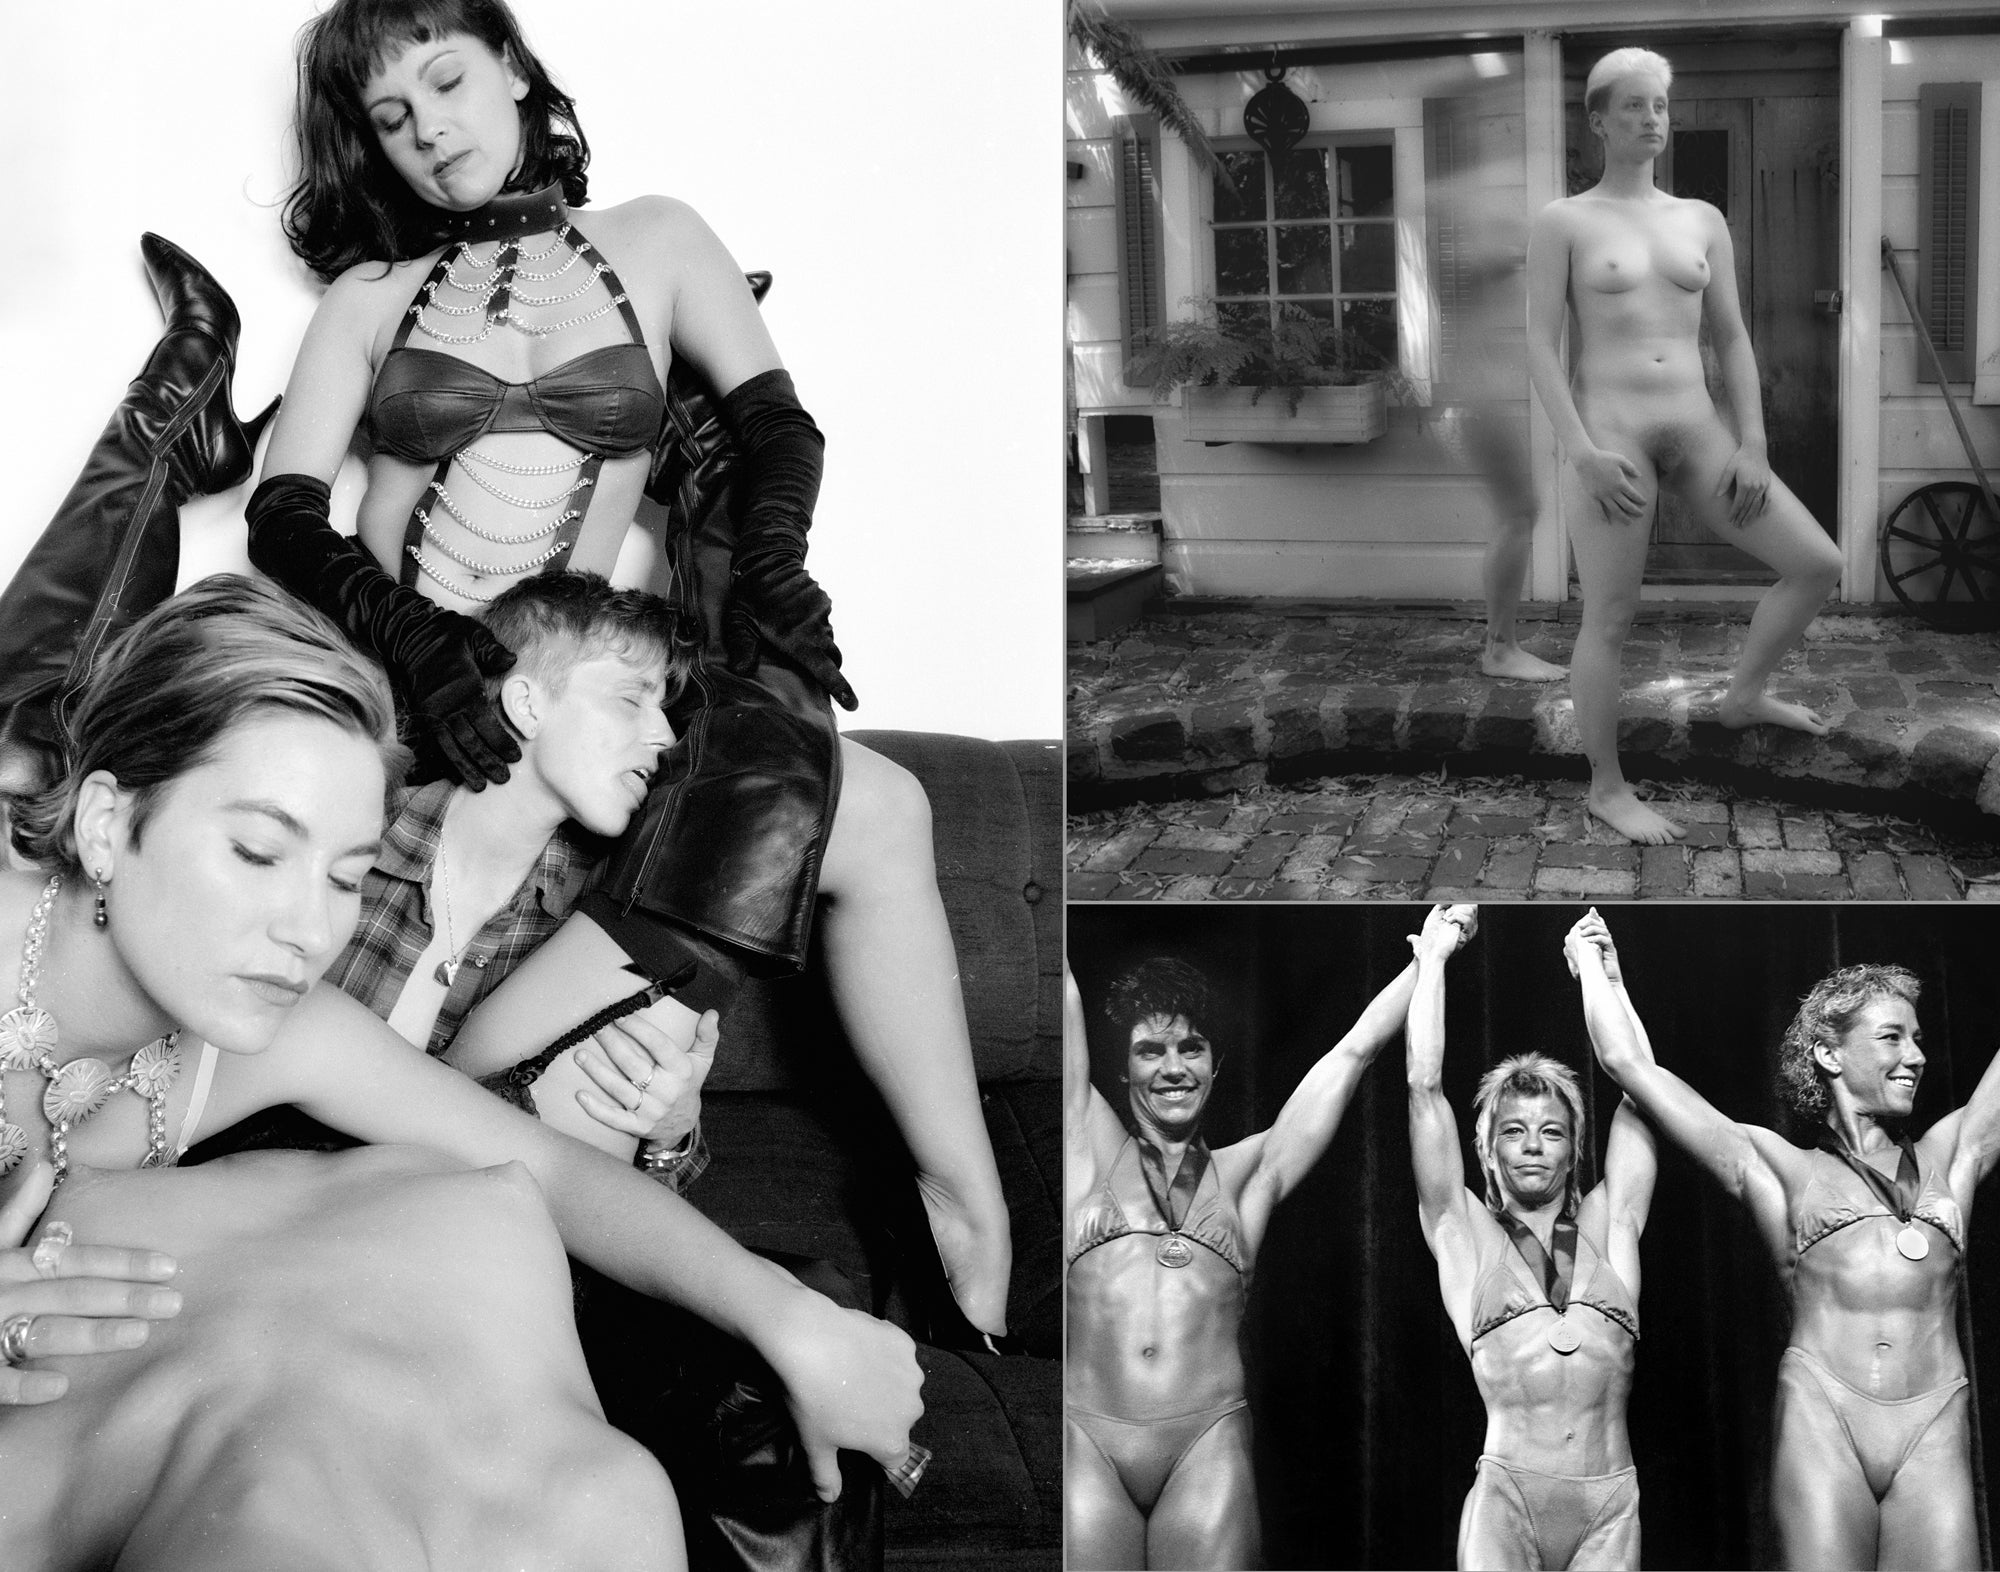 Archive of the lesbian photographer Shelby Cohen, including 1980s BDSM, the Gay Games, Theatre Rhinocerous, and many other projects